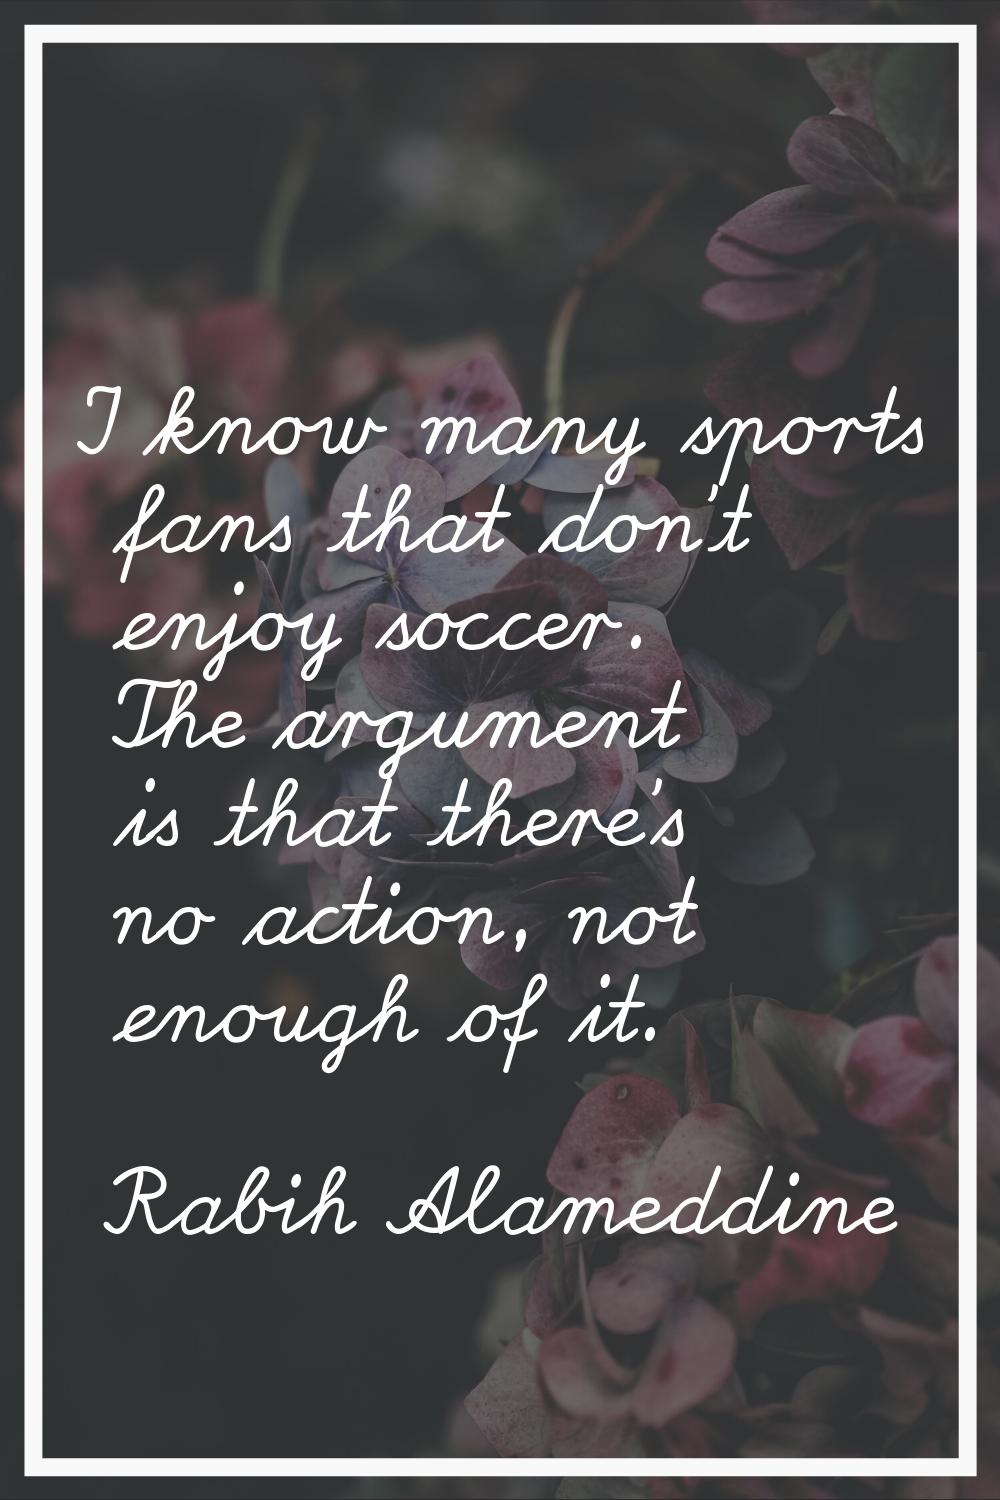 I know many sports fans that don't enjoy soccer. The argument is that there's no action, not enough